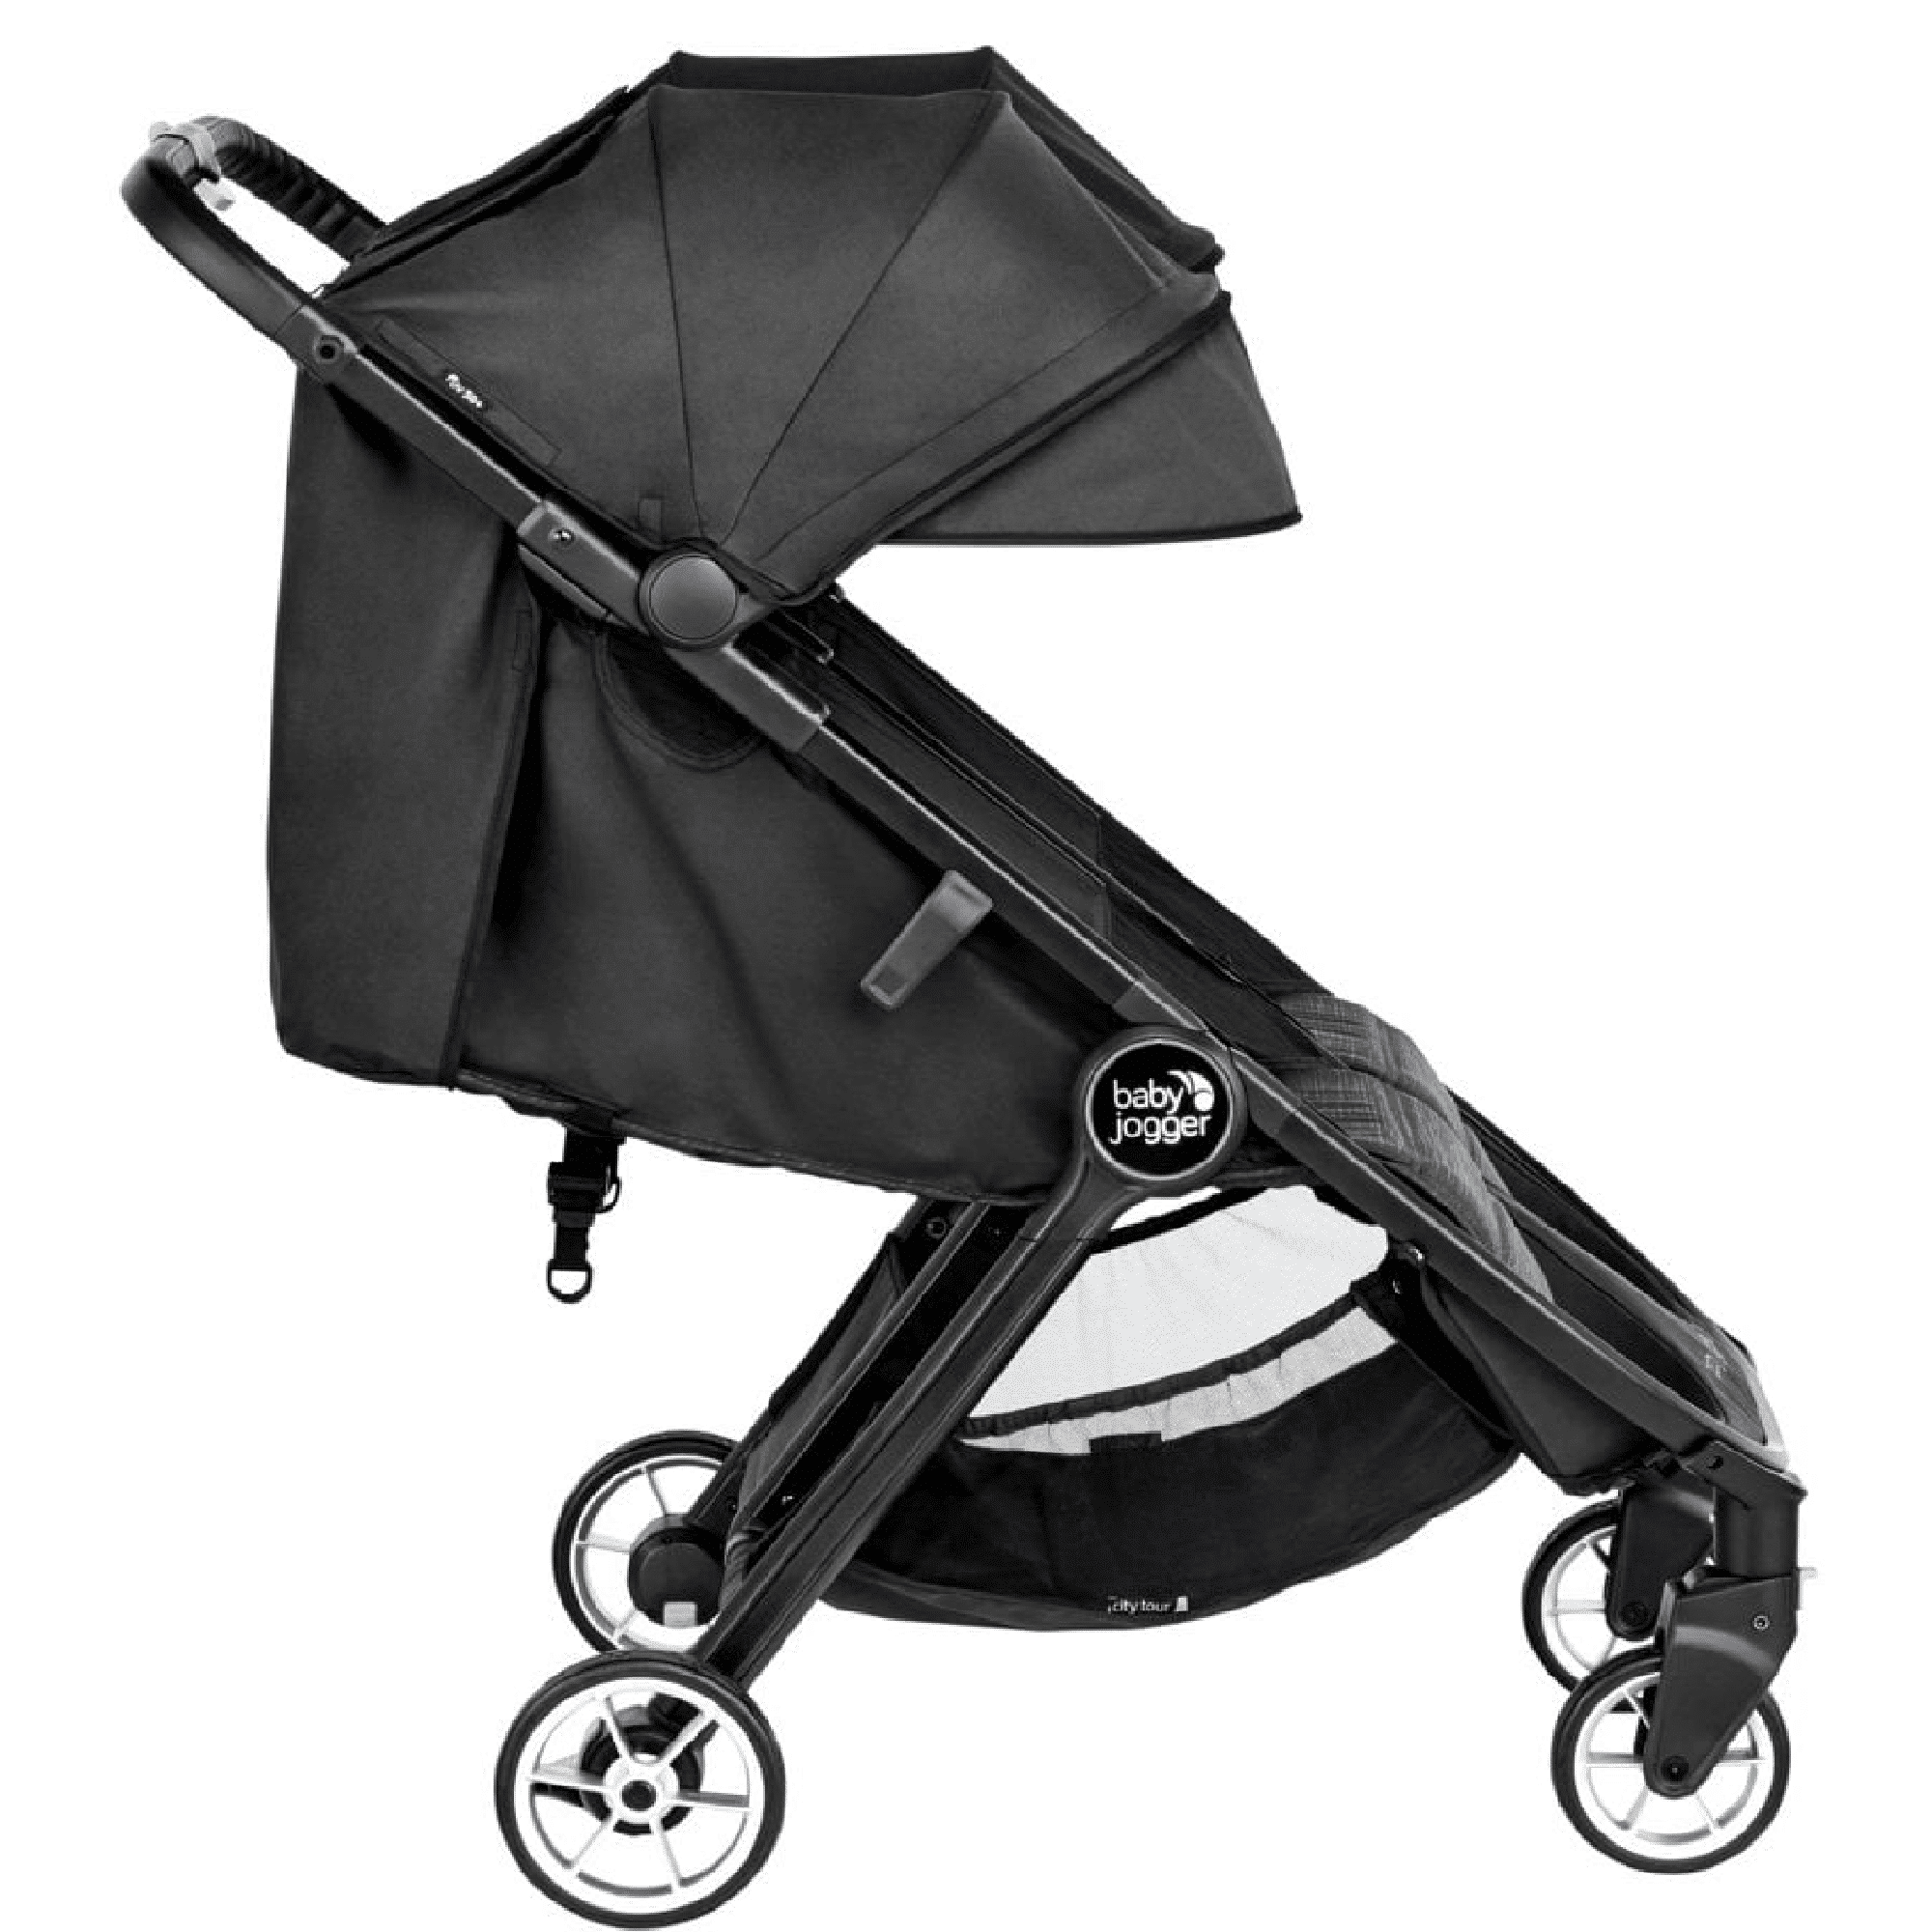 Baby Jogger Black City Tour 2 Double and Store